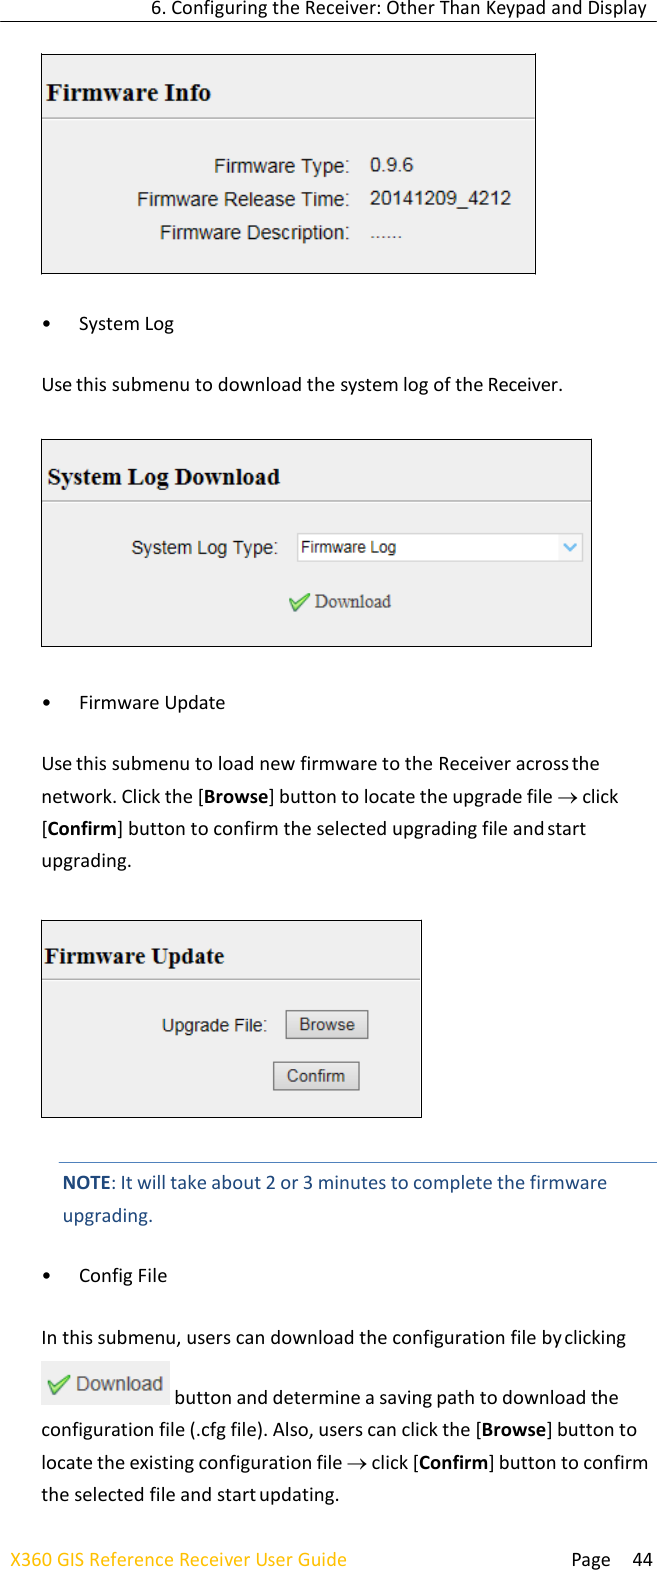 6. Configuring the Receiver: Other Than Keypad and Display  Page 44 X360 GIS Reference Receiver User Guide      • System Log  Use this submenu to download the system log of the Receiver.     • Firmware Update  Use this submenu to load new firmware to the Receiver across the network. Click the [Browse] button to locate the upgrade file click [Confirm] button to confirm the selected upgrading file and start upgrading.       NOTE: It will take about 2 or 3 minutes to complete the firmware upgrading.  • Config File  In this submenu, users can download the configuration file by clicking  button and determine a saving path to download the configuration file (.cfg file). Also, users can click the [Browse] button to locate the existing configuration file click [Confirm] button to confirm the selected file and start updating.       